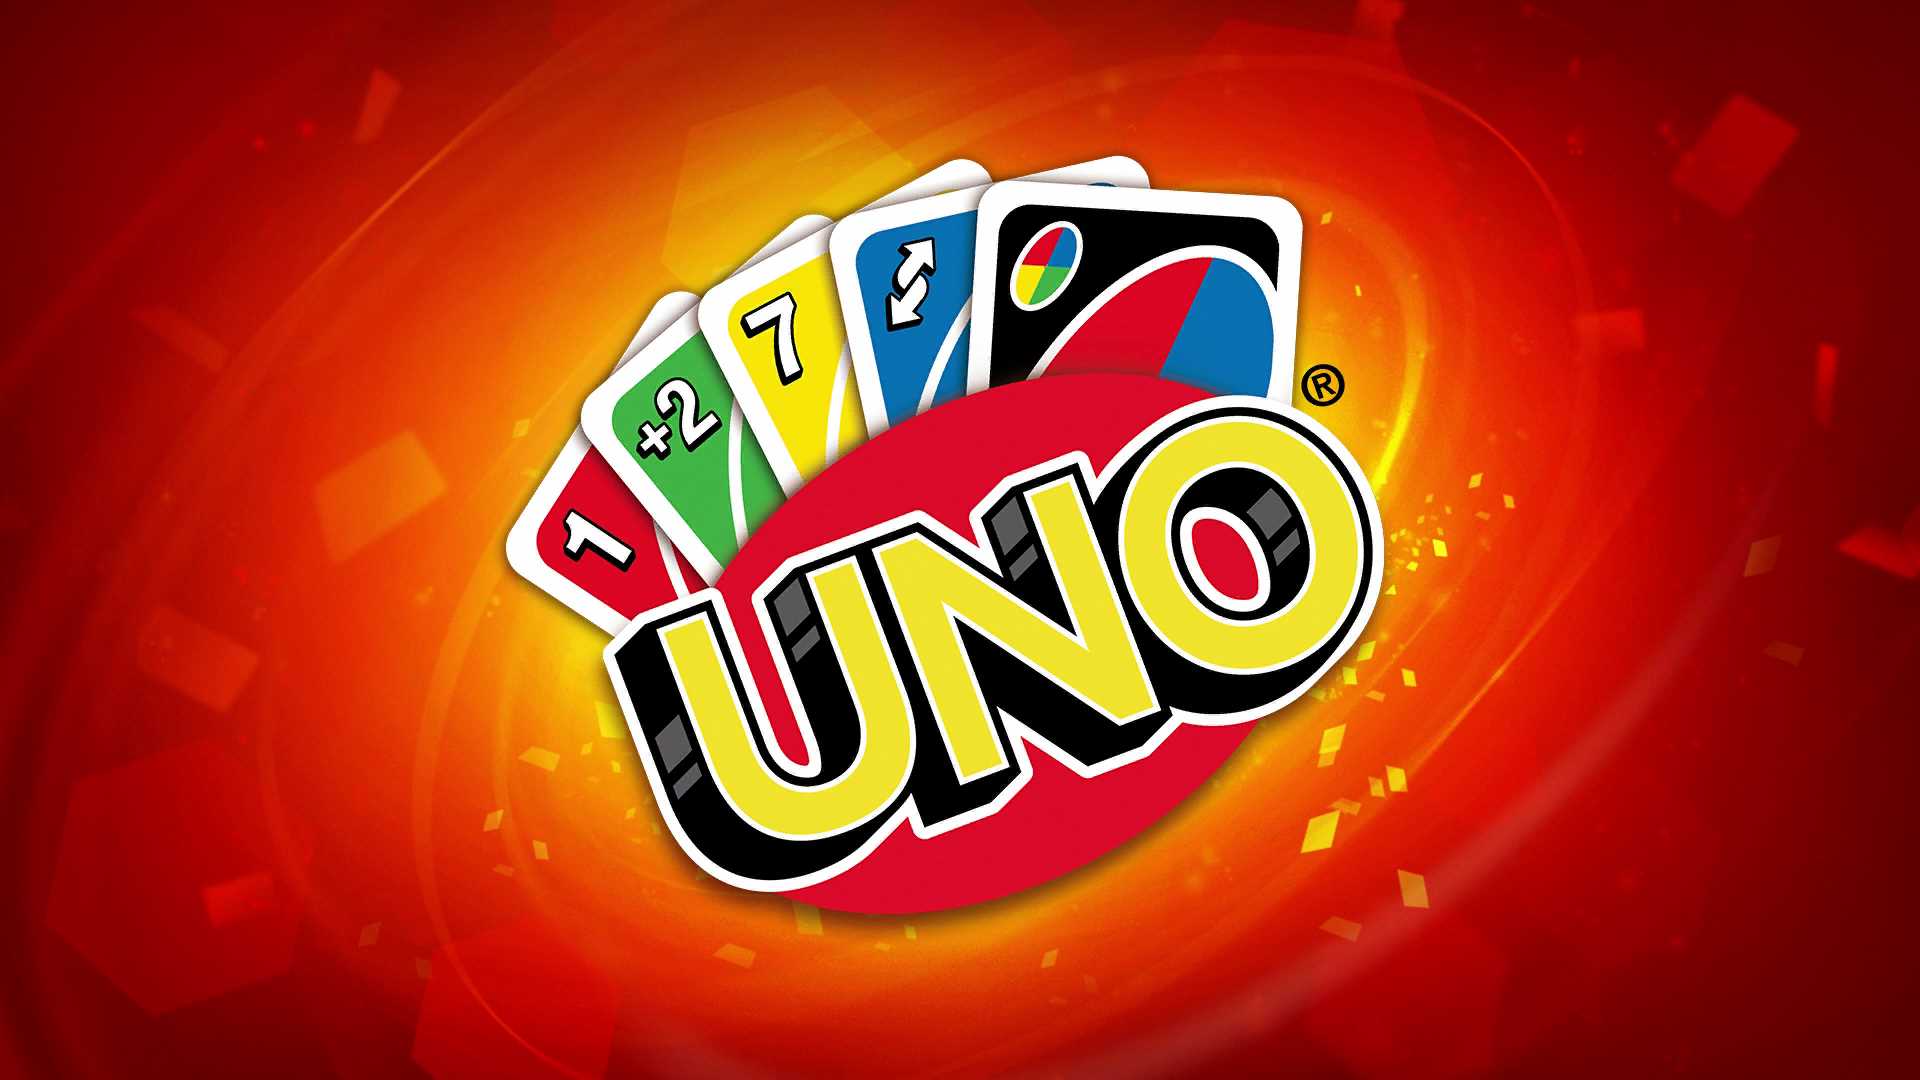 2 person uno game online free